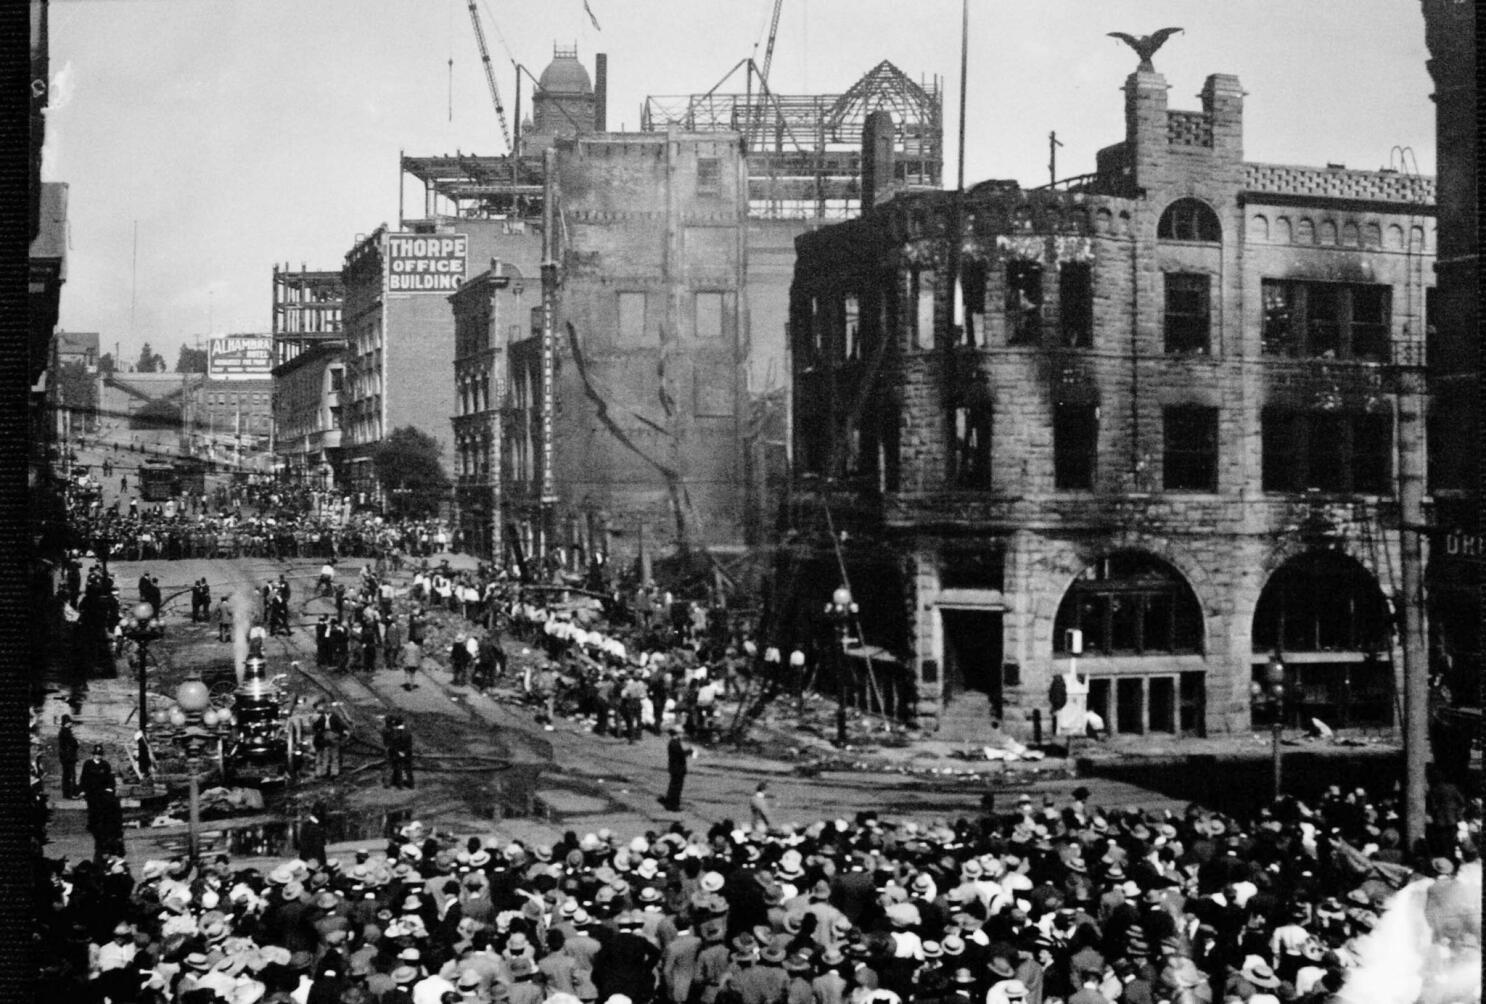 L.A. Times building bombing — Calisphere